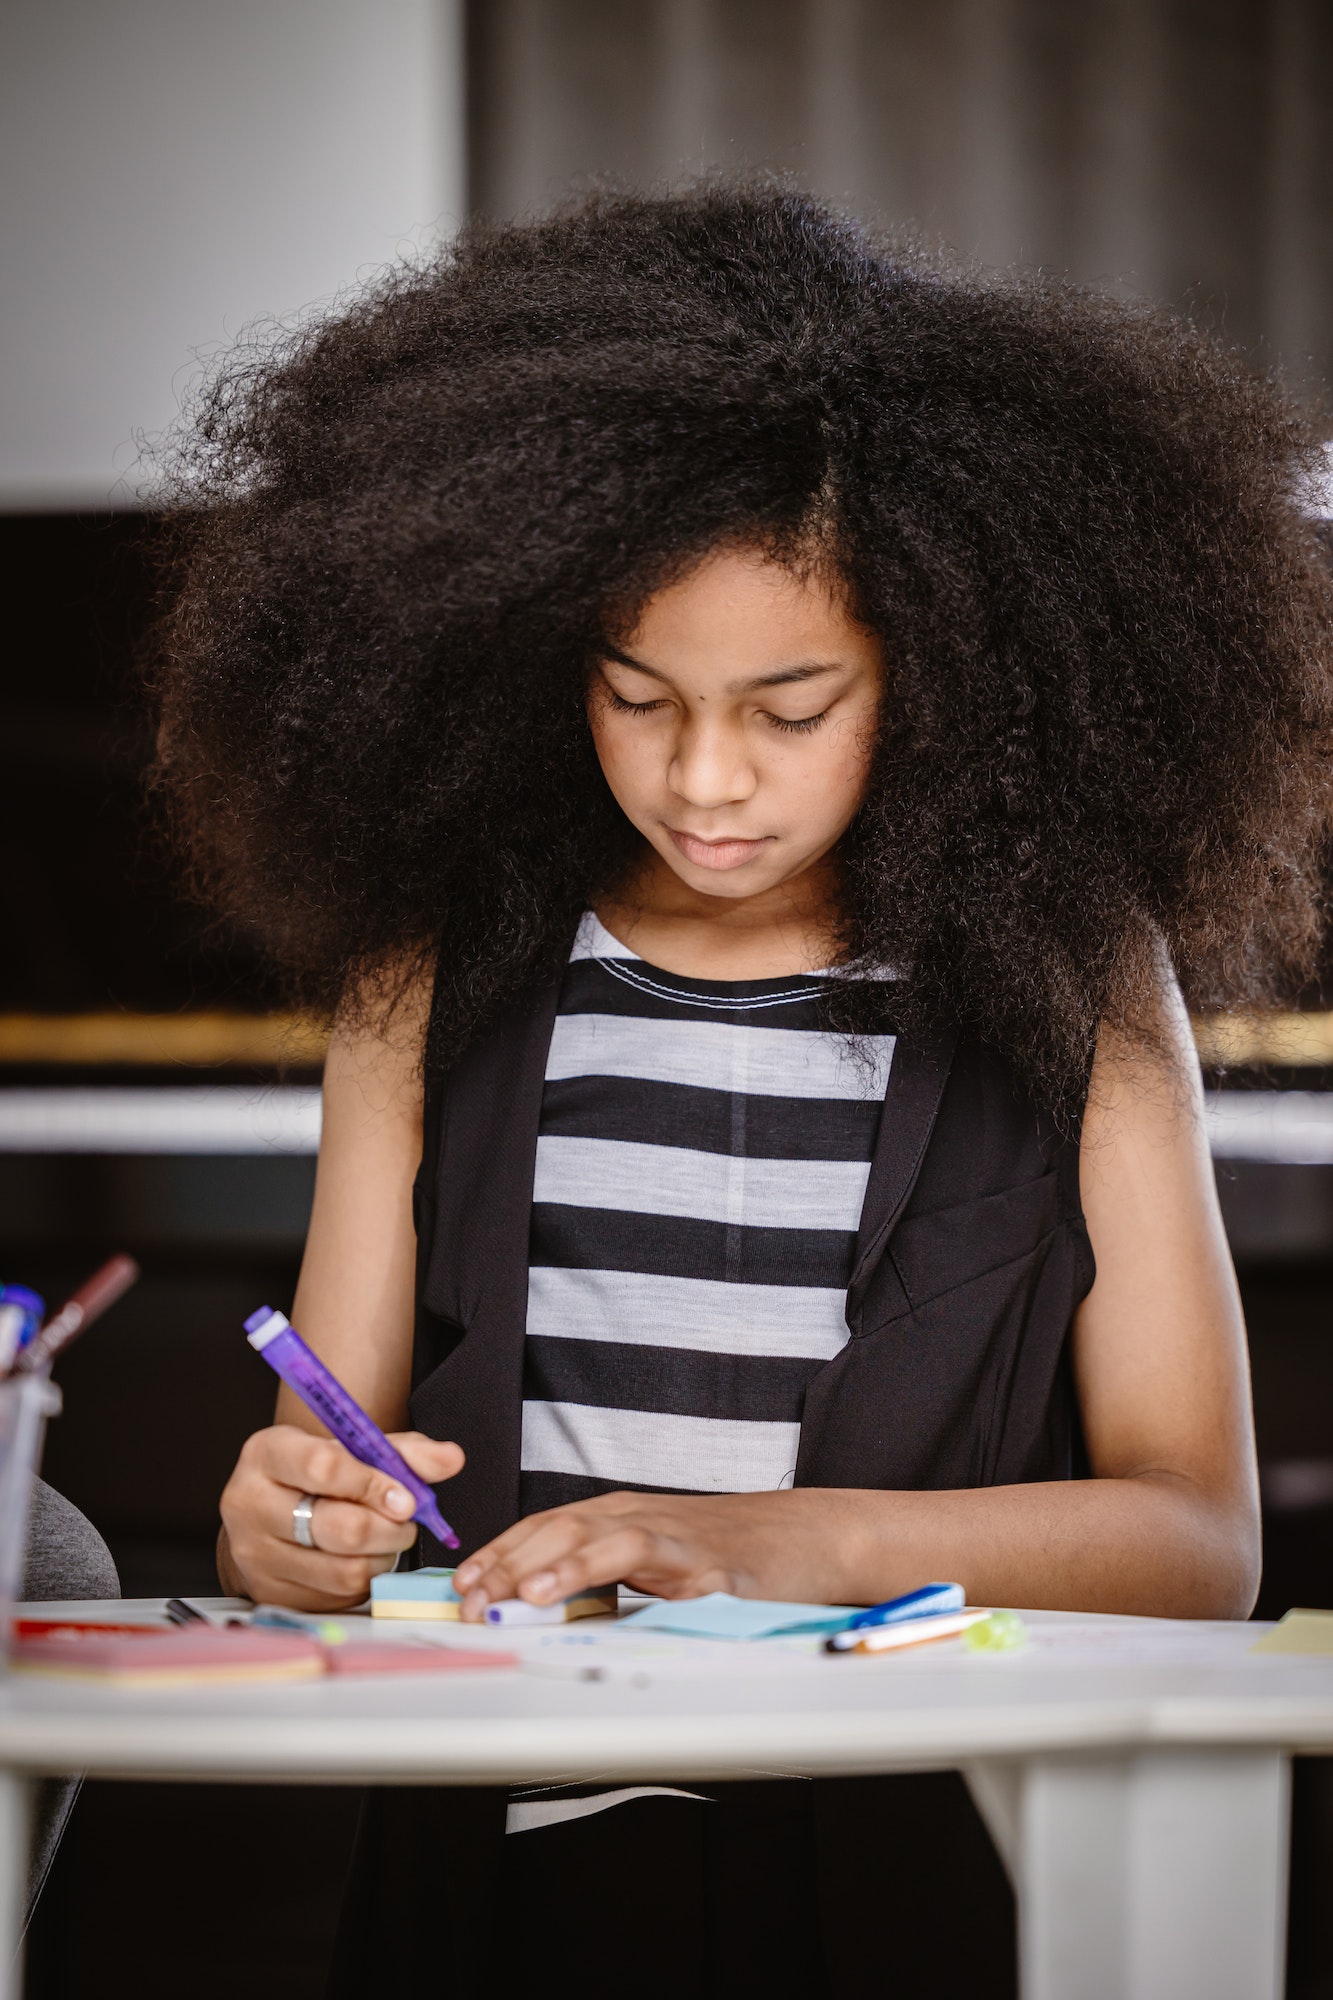 African teenager with afro hair engaged in learning at PalTutors education center.